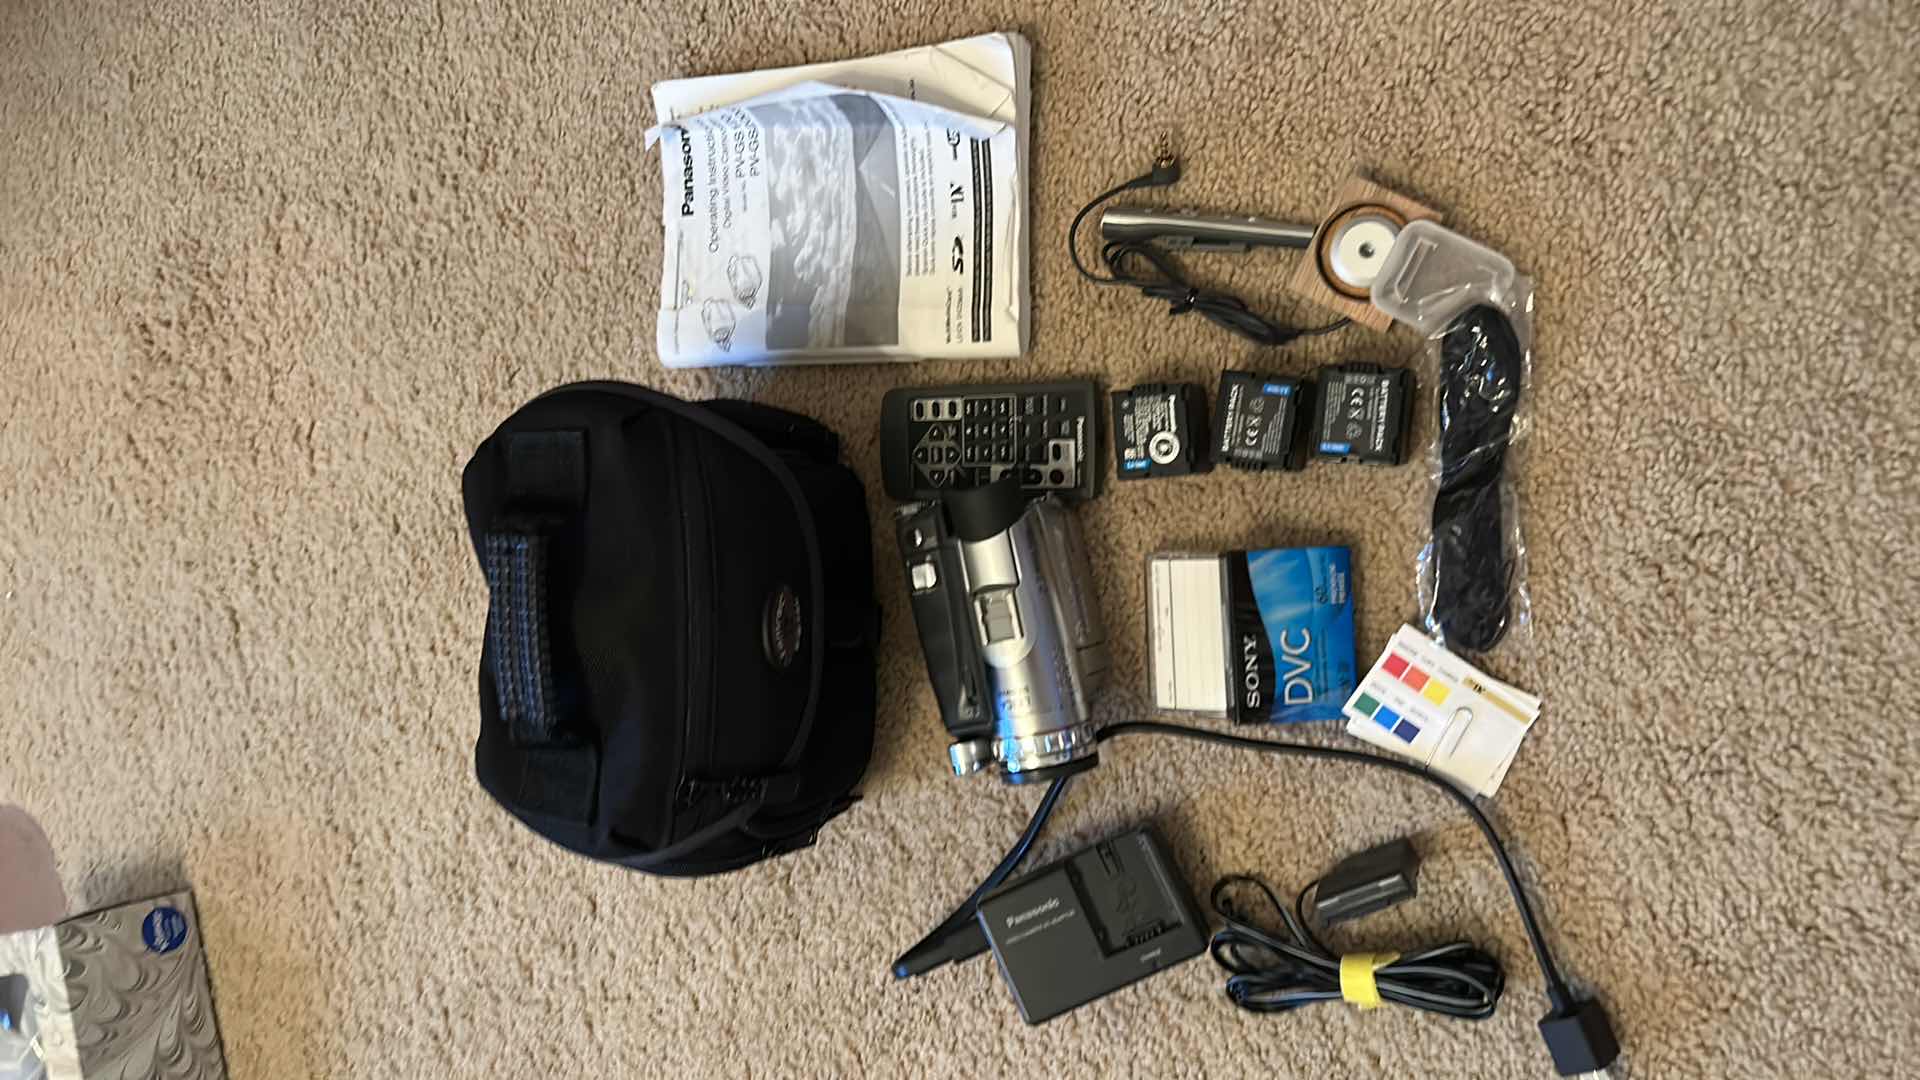 Photo 8 of Panasonic digital video camcorder with accessories and carrying case